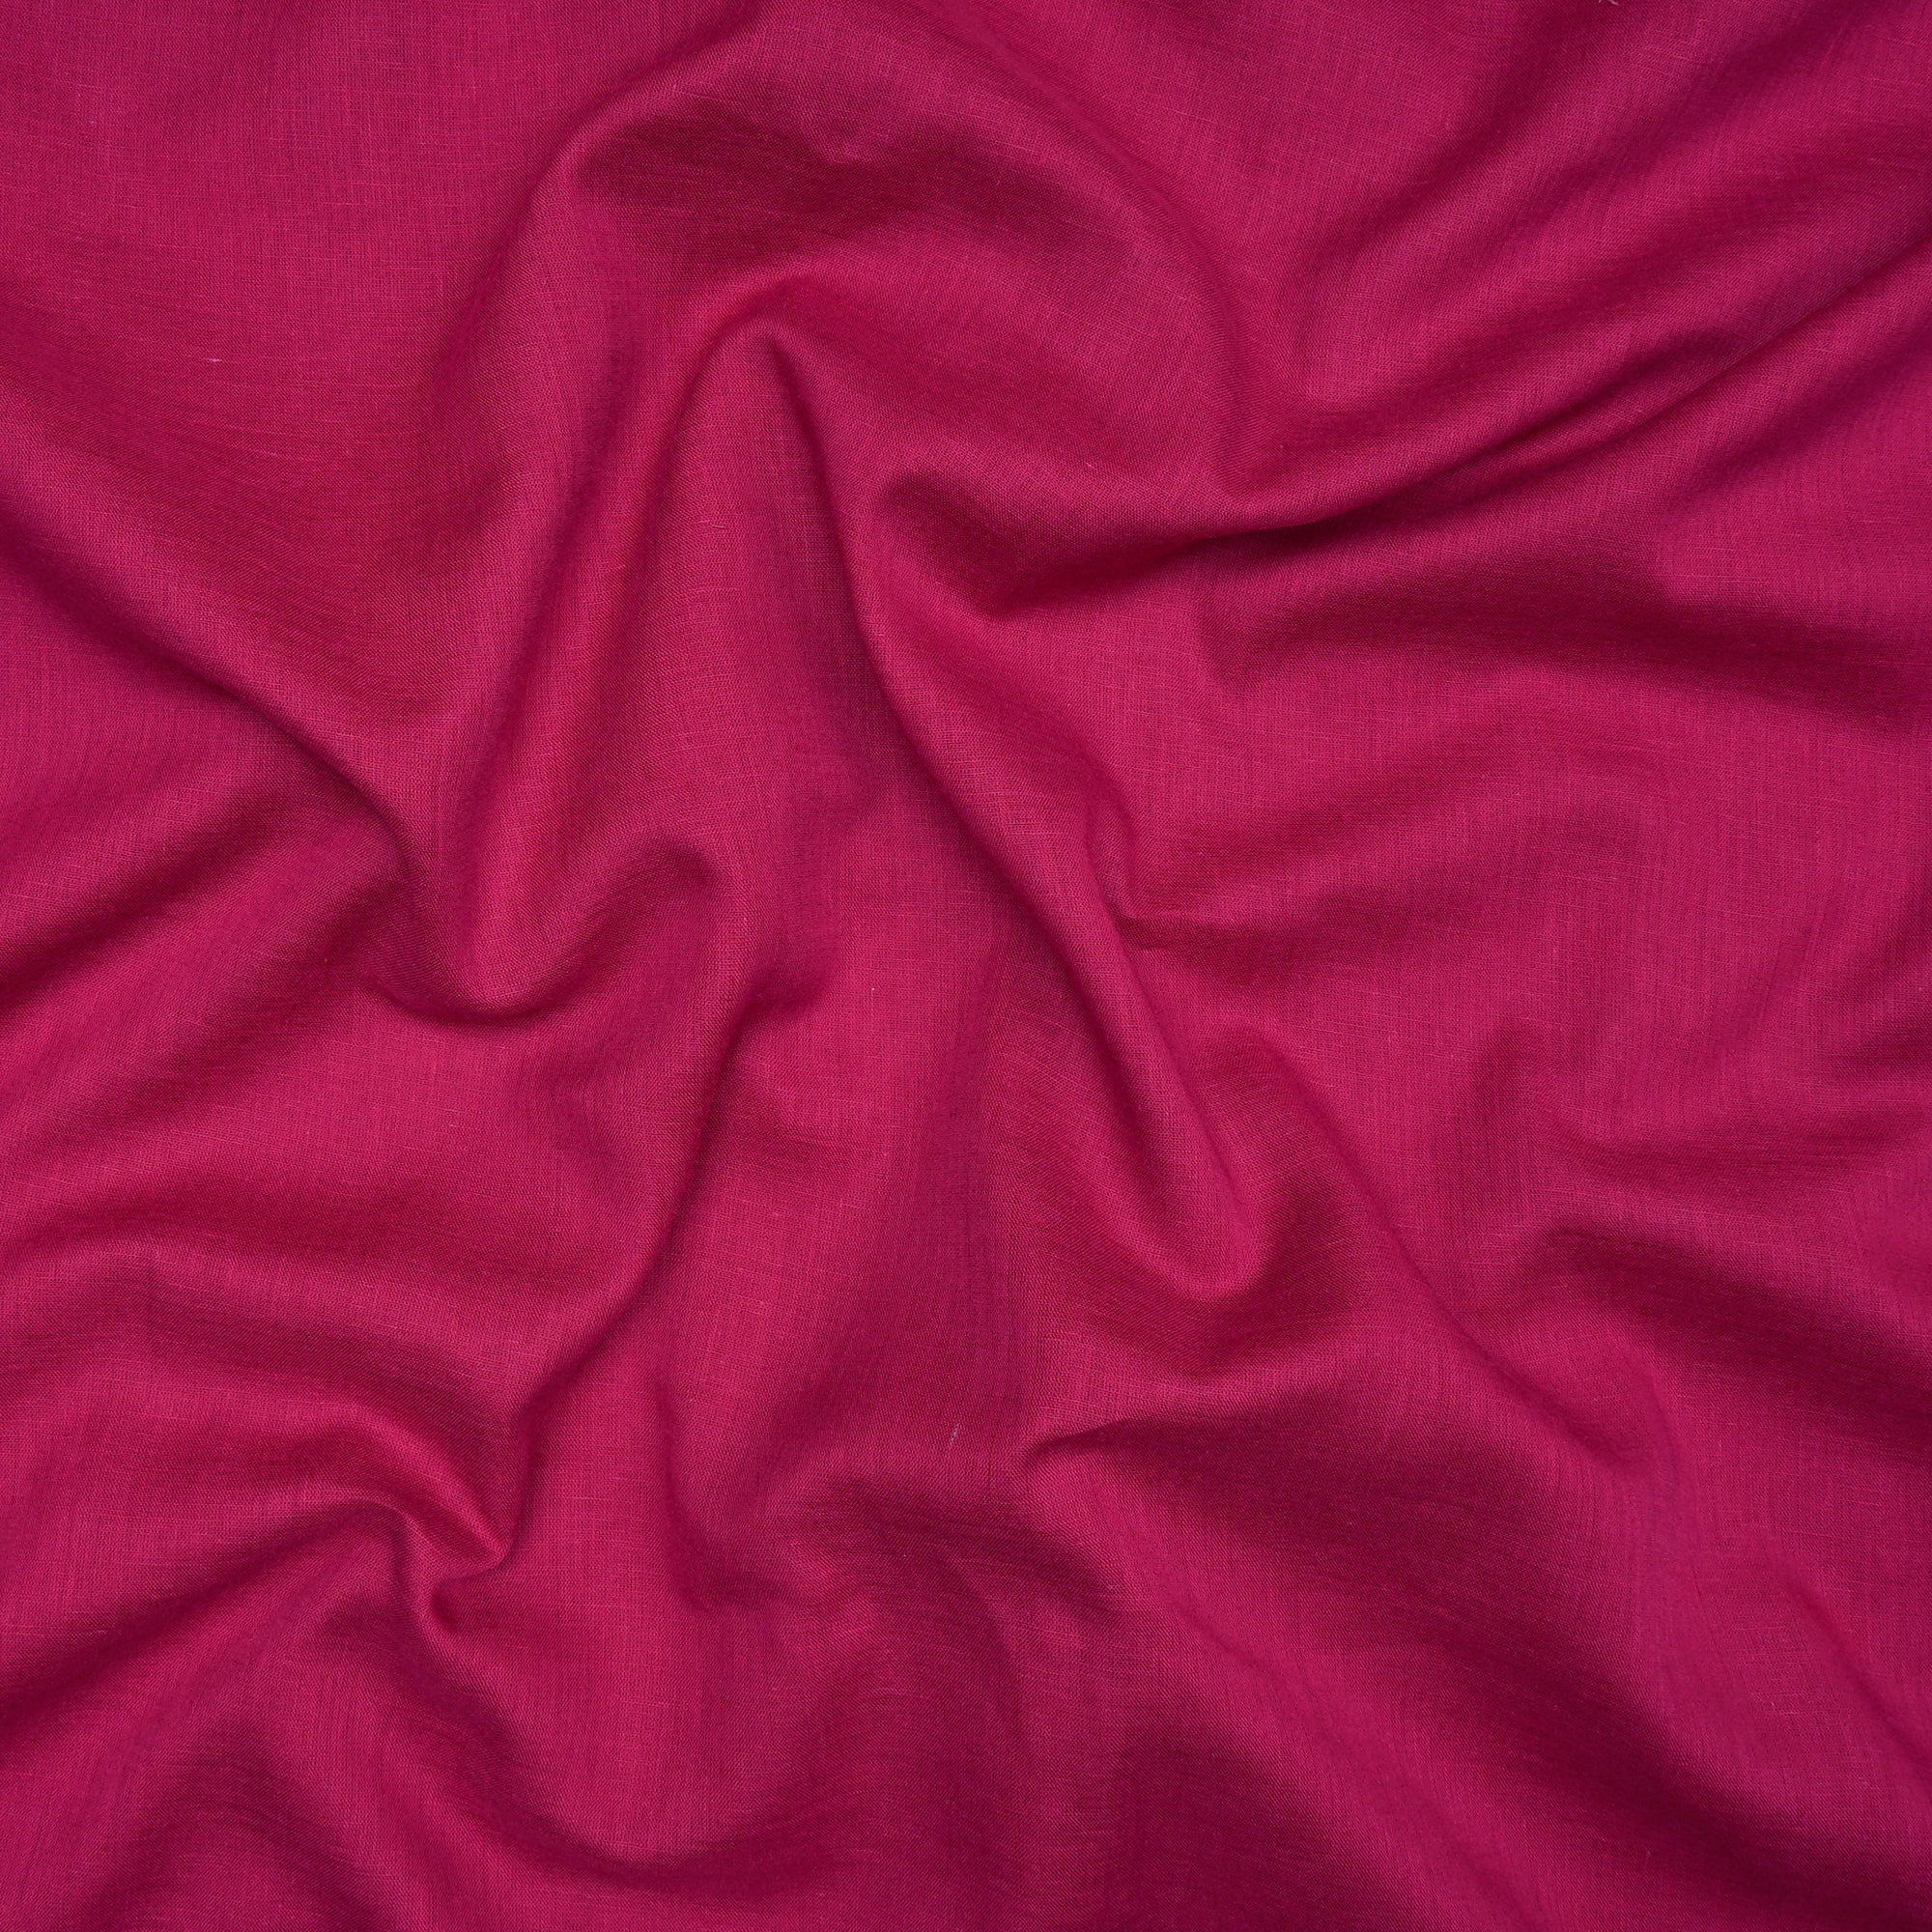 Rani Pink Cotton Voile Fabric